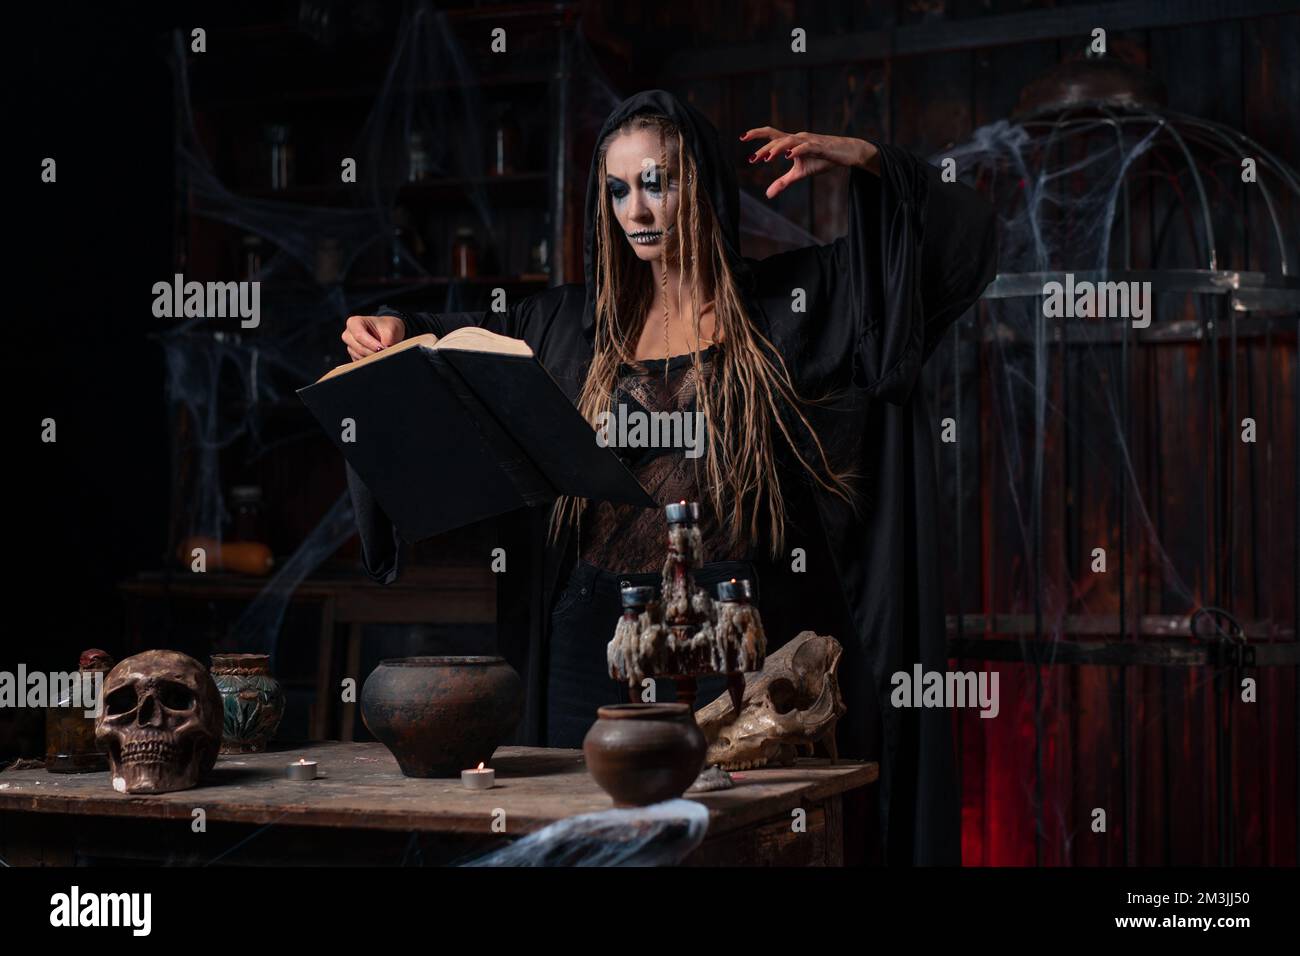 Witch dressed dark dungeon room use magic book for conjuring magic spell. Female necromancer wizard gothic interior with skull, cage, spider web Stock Photo